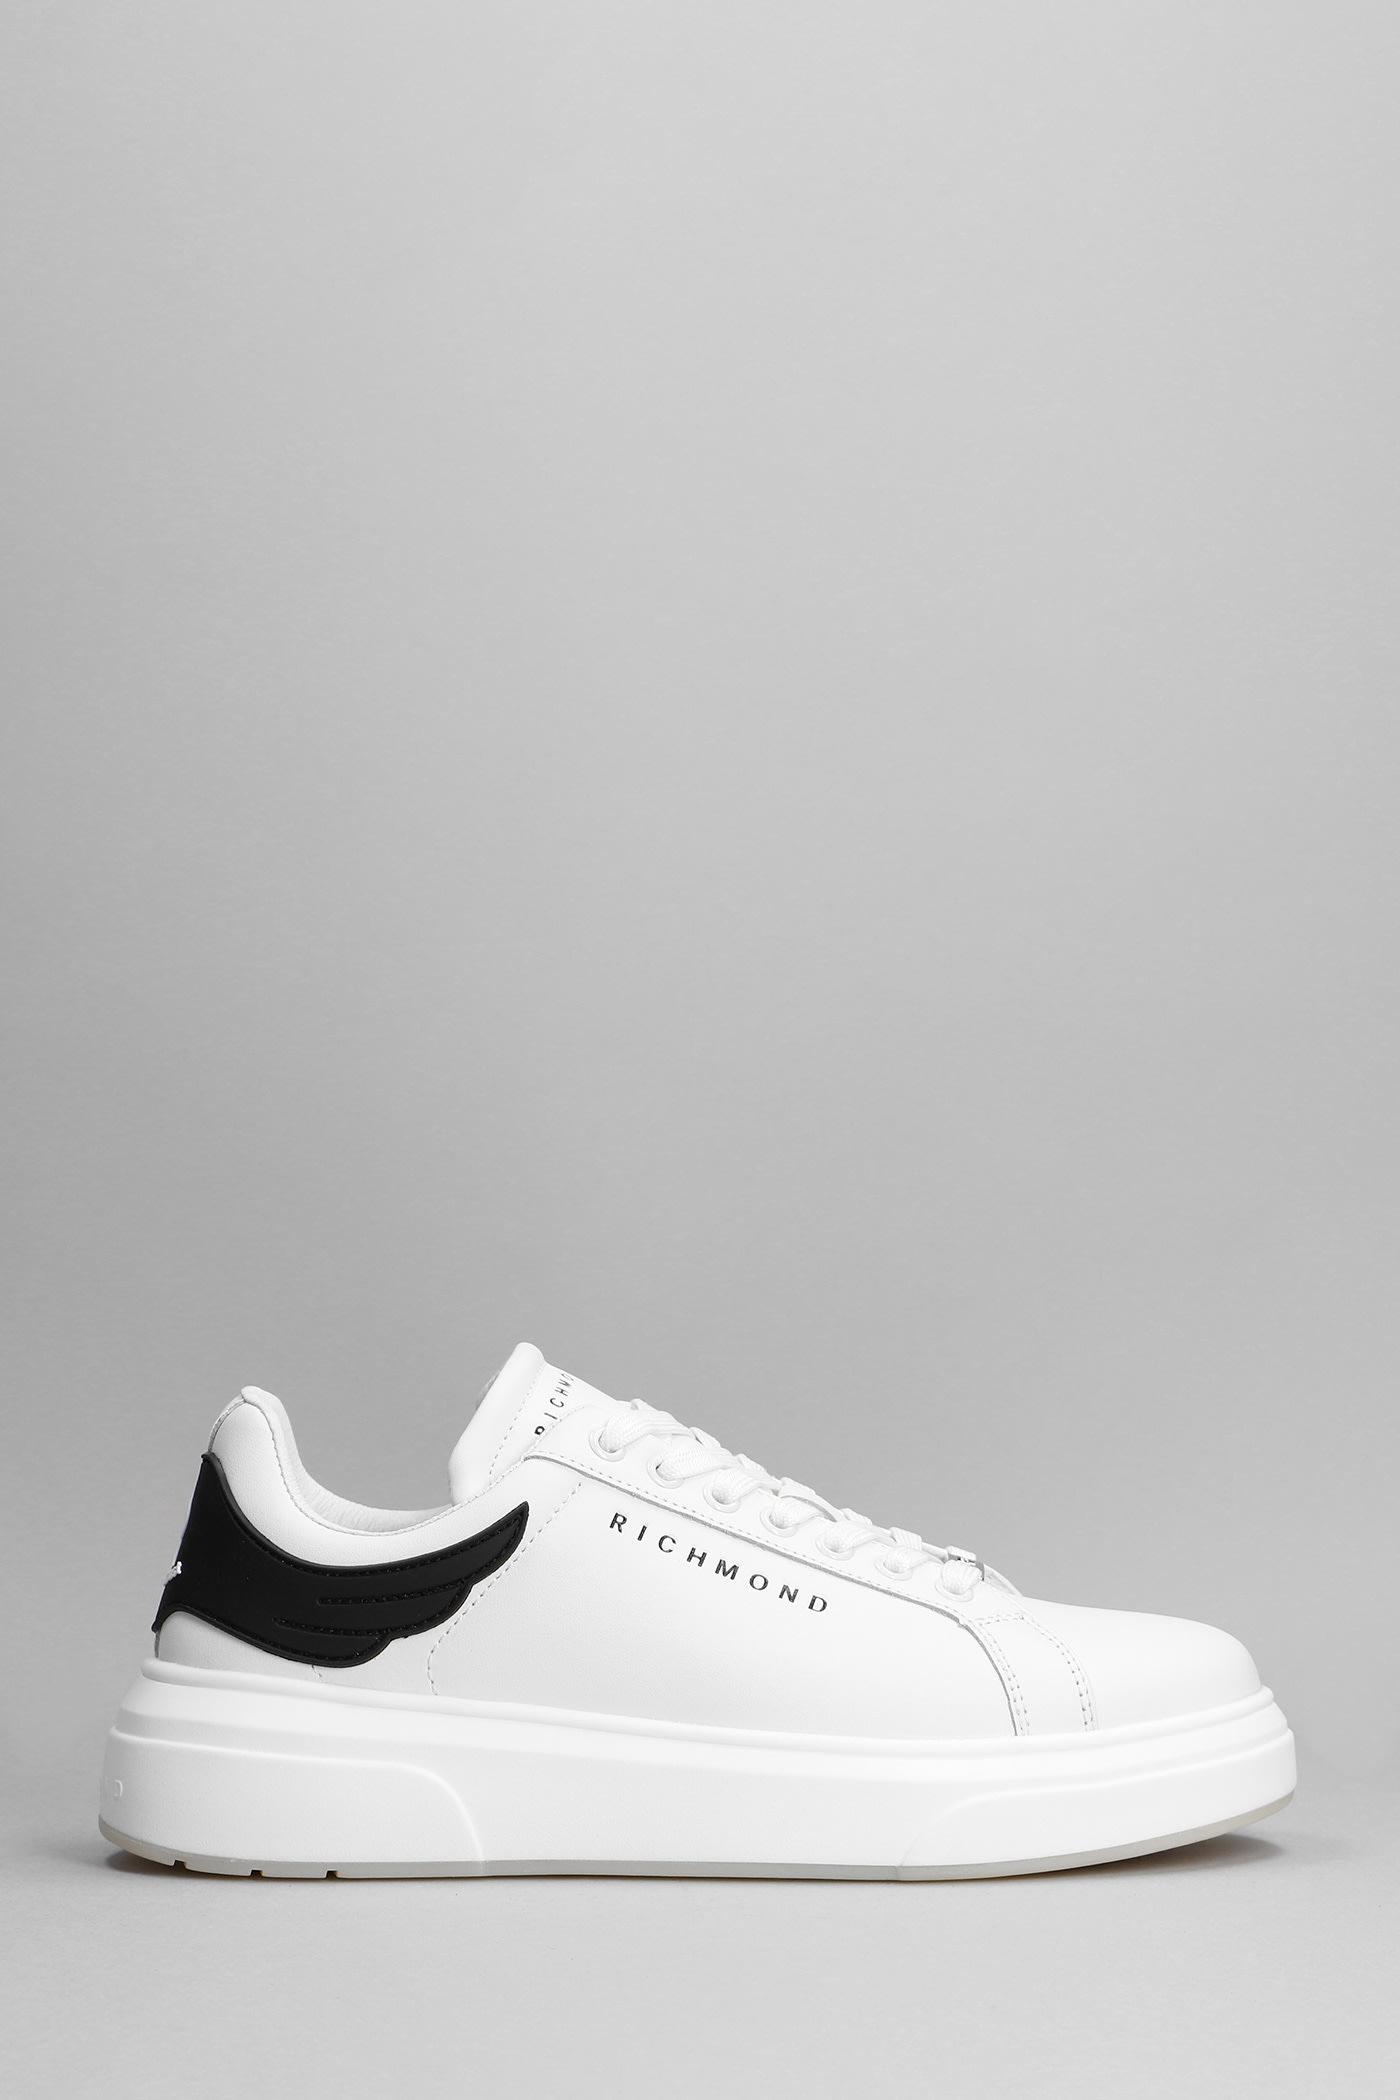 John Richmond Sneakers In White Leather for Men | Lyst